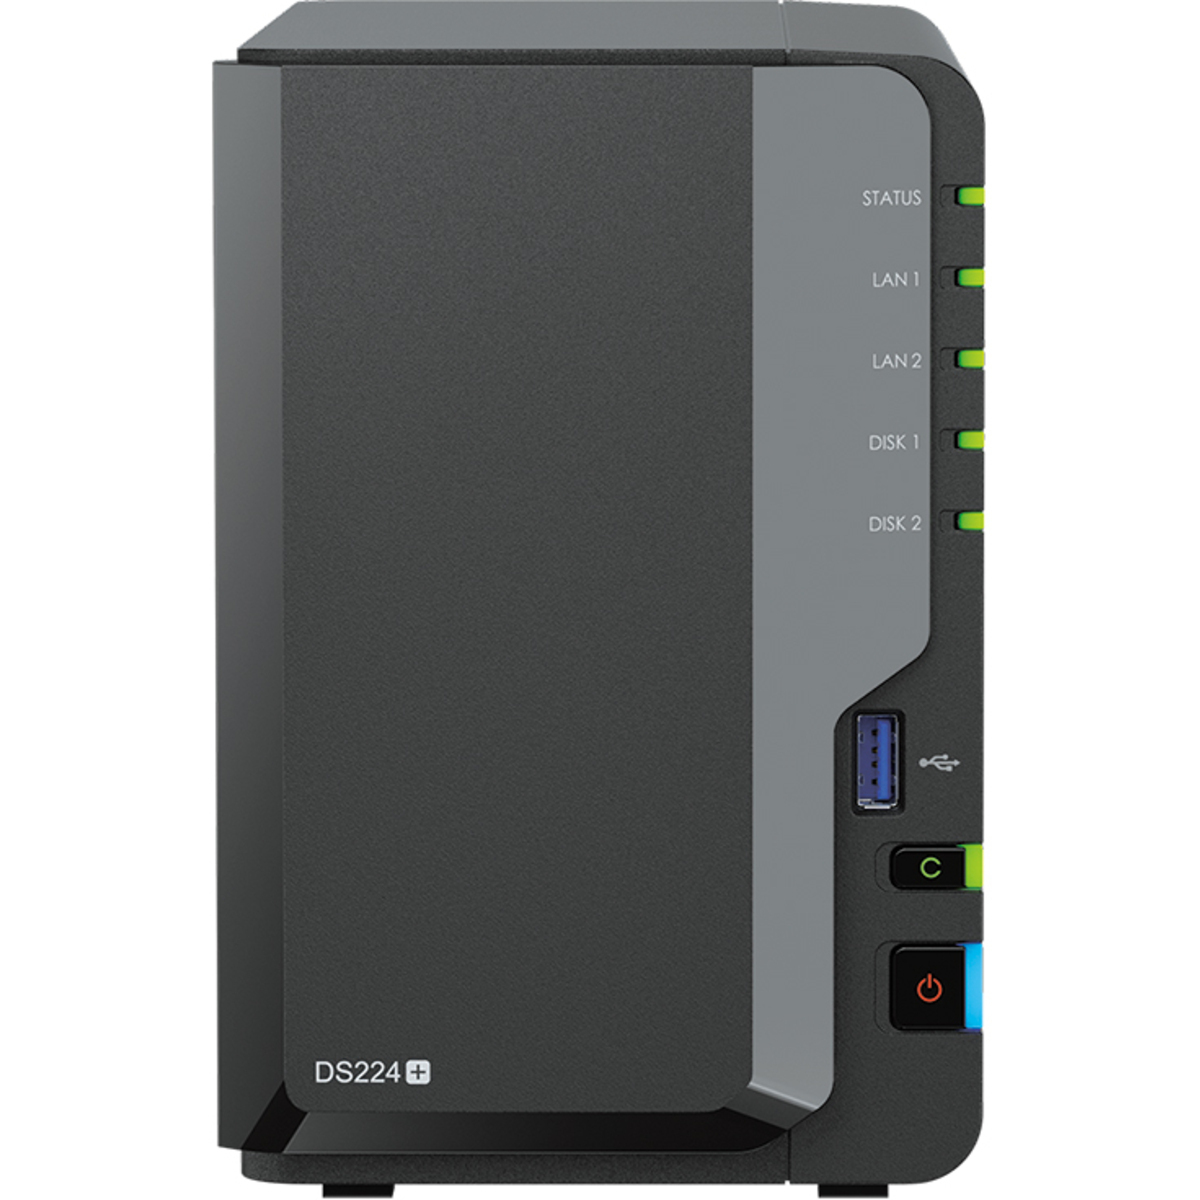 buy Synology DiskStation DS224+ 2tb Desktop NAS - Network Attached Storage Device 2x1000gb Samsung 870 EVO MZ-77E1T0BAM 2.5 560/530MB/s SATA 6Gb/s SSD CONSUMER Class Drives Installed - Burn-In Tested - ON SALE - FREE RAM UPGRADE - nas headquarters buy network attached storage server device das new raid-5 free shipping simply usa DiskStation DS224+